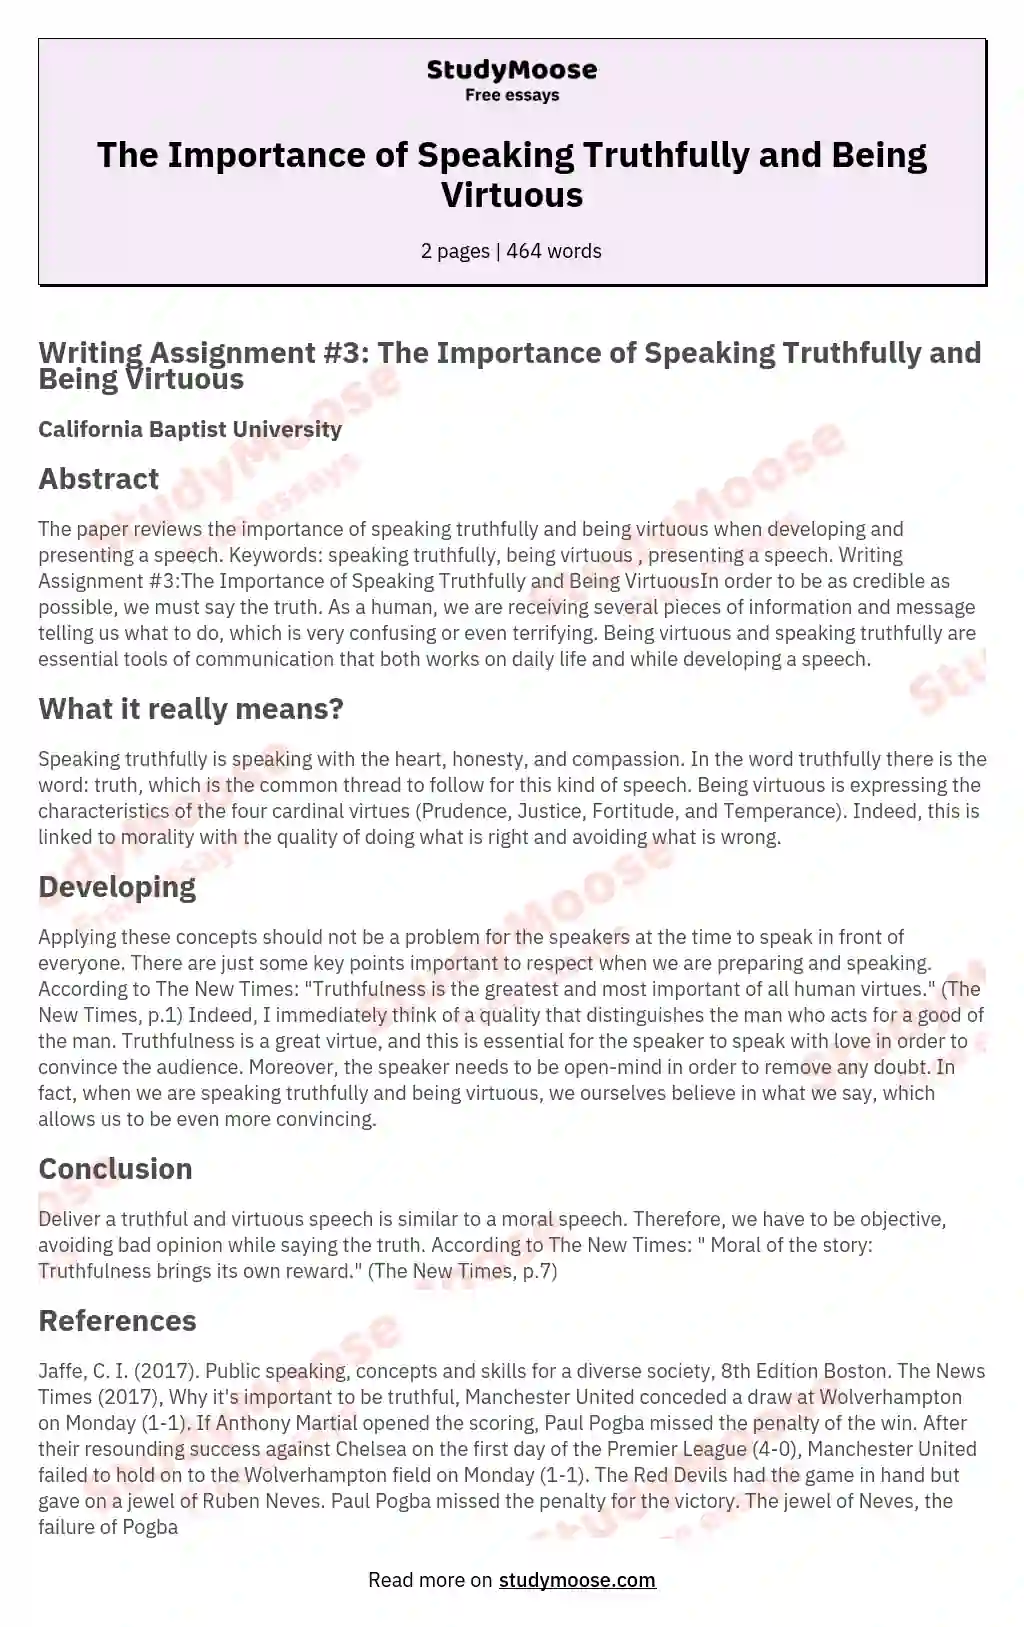 The Importance of Speaking Truthfully and Being Virtuous essay